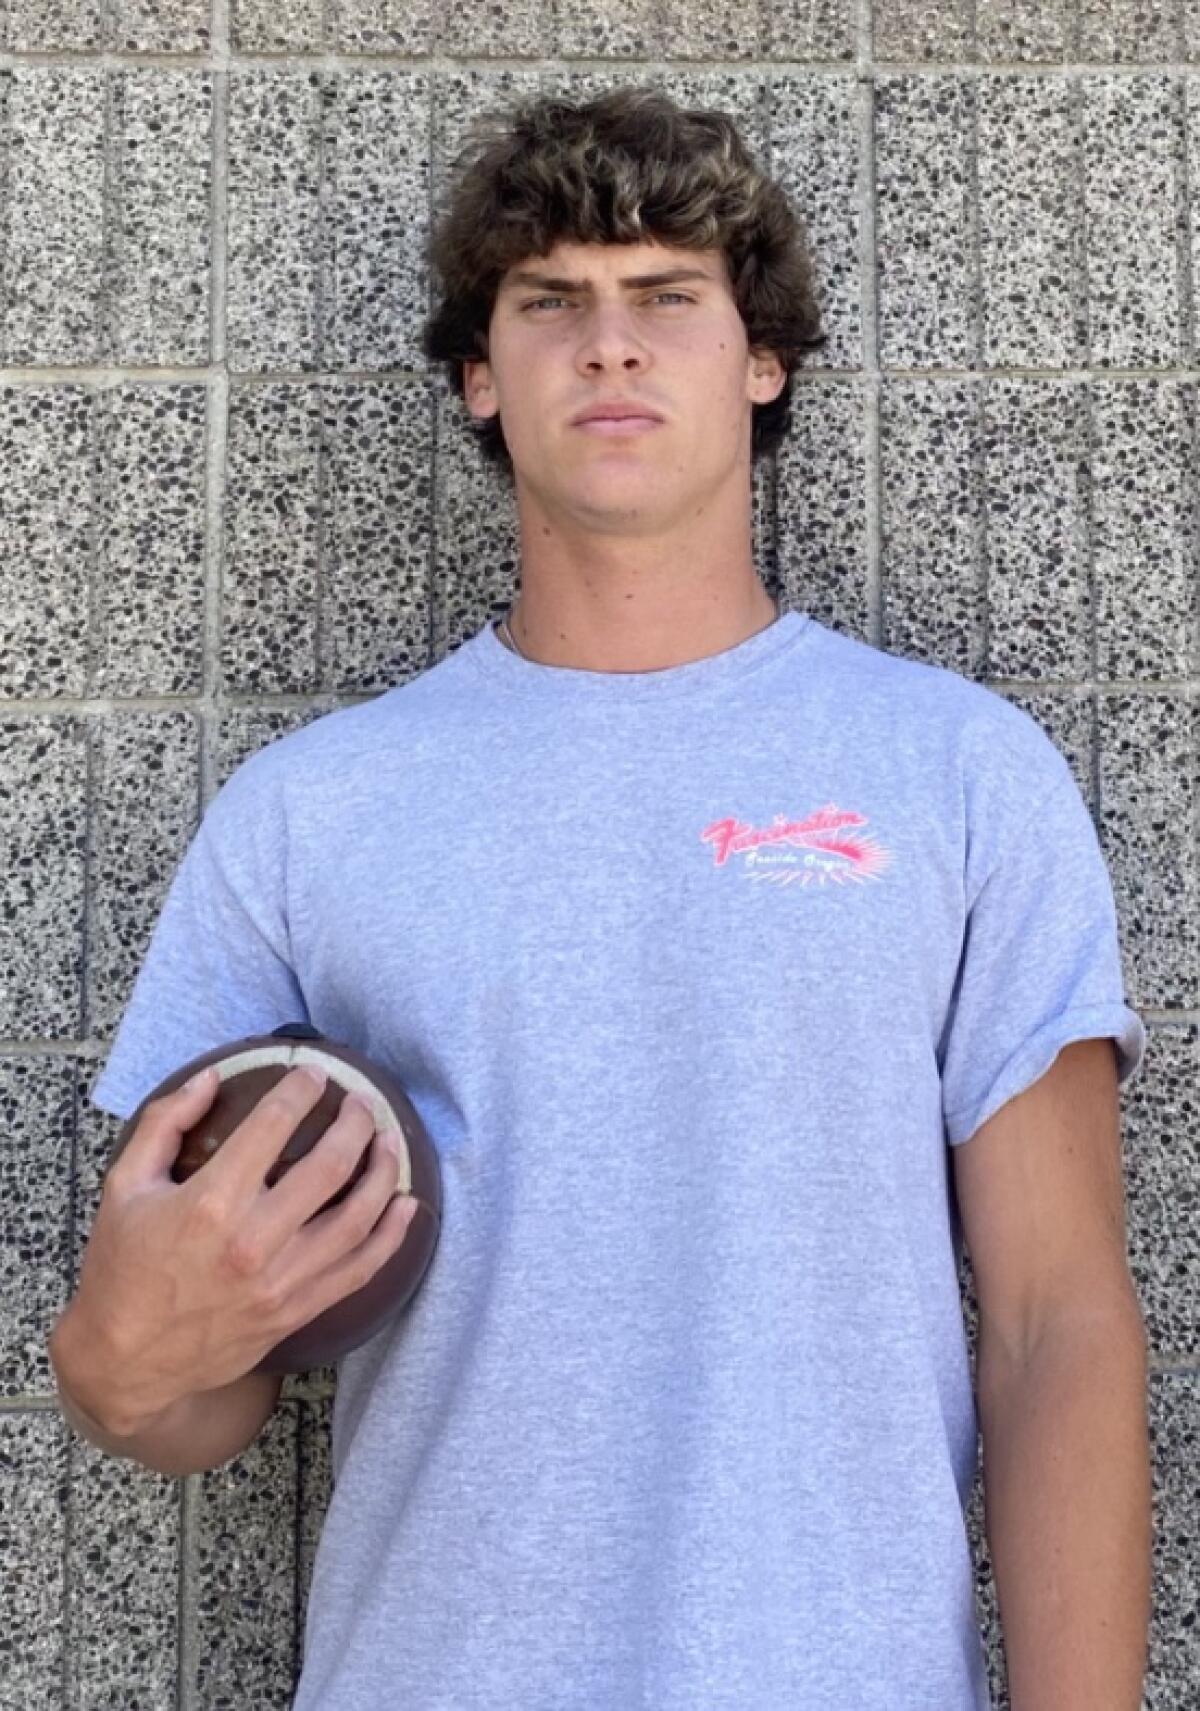 Cypress standout two-sport athlete Matthew Morrell is starring at wide receiver and baseball.